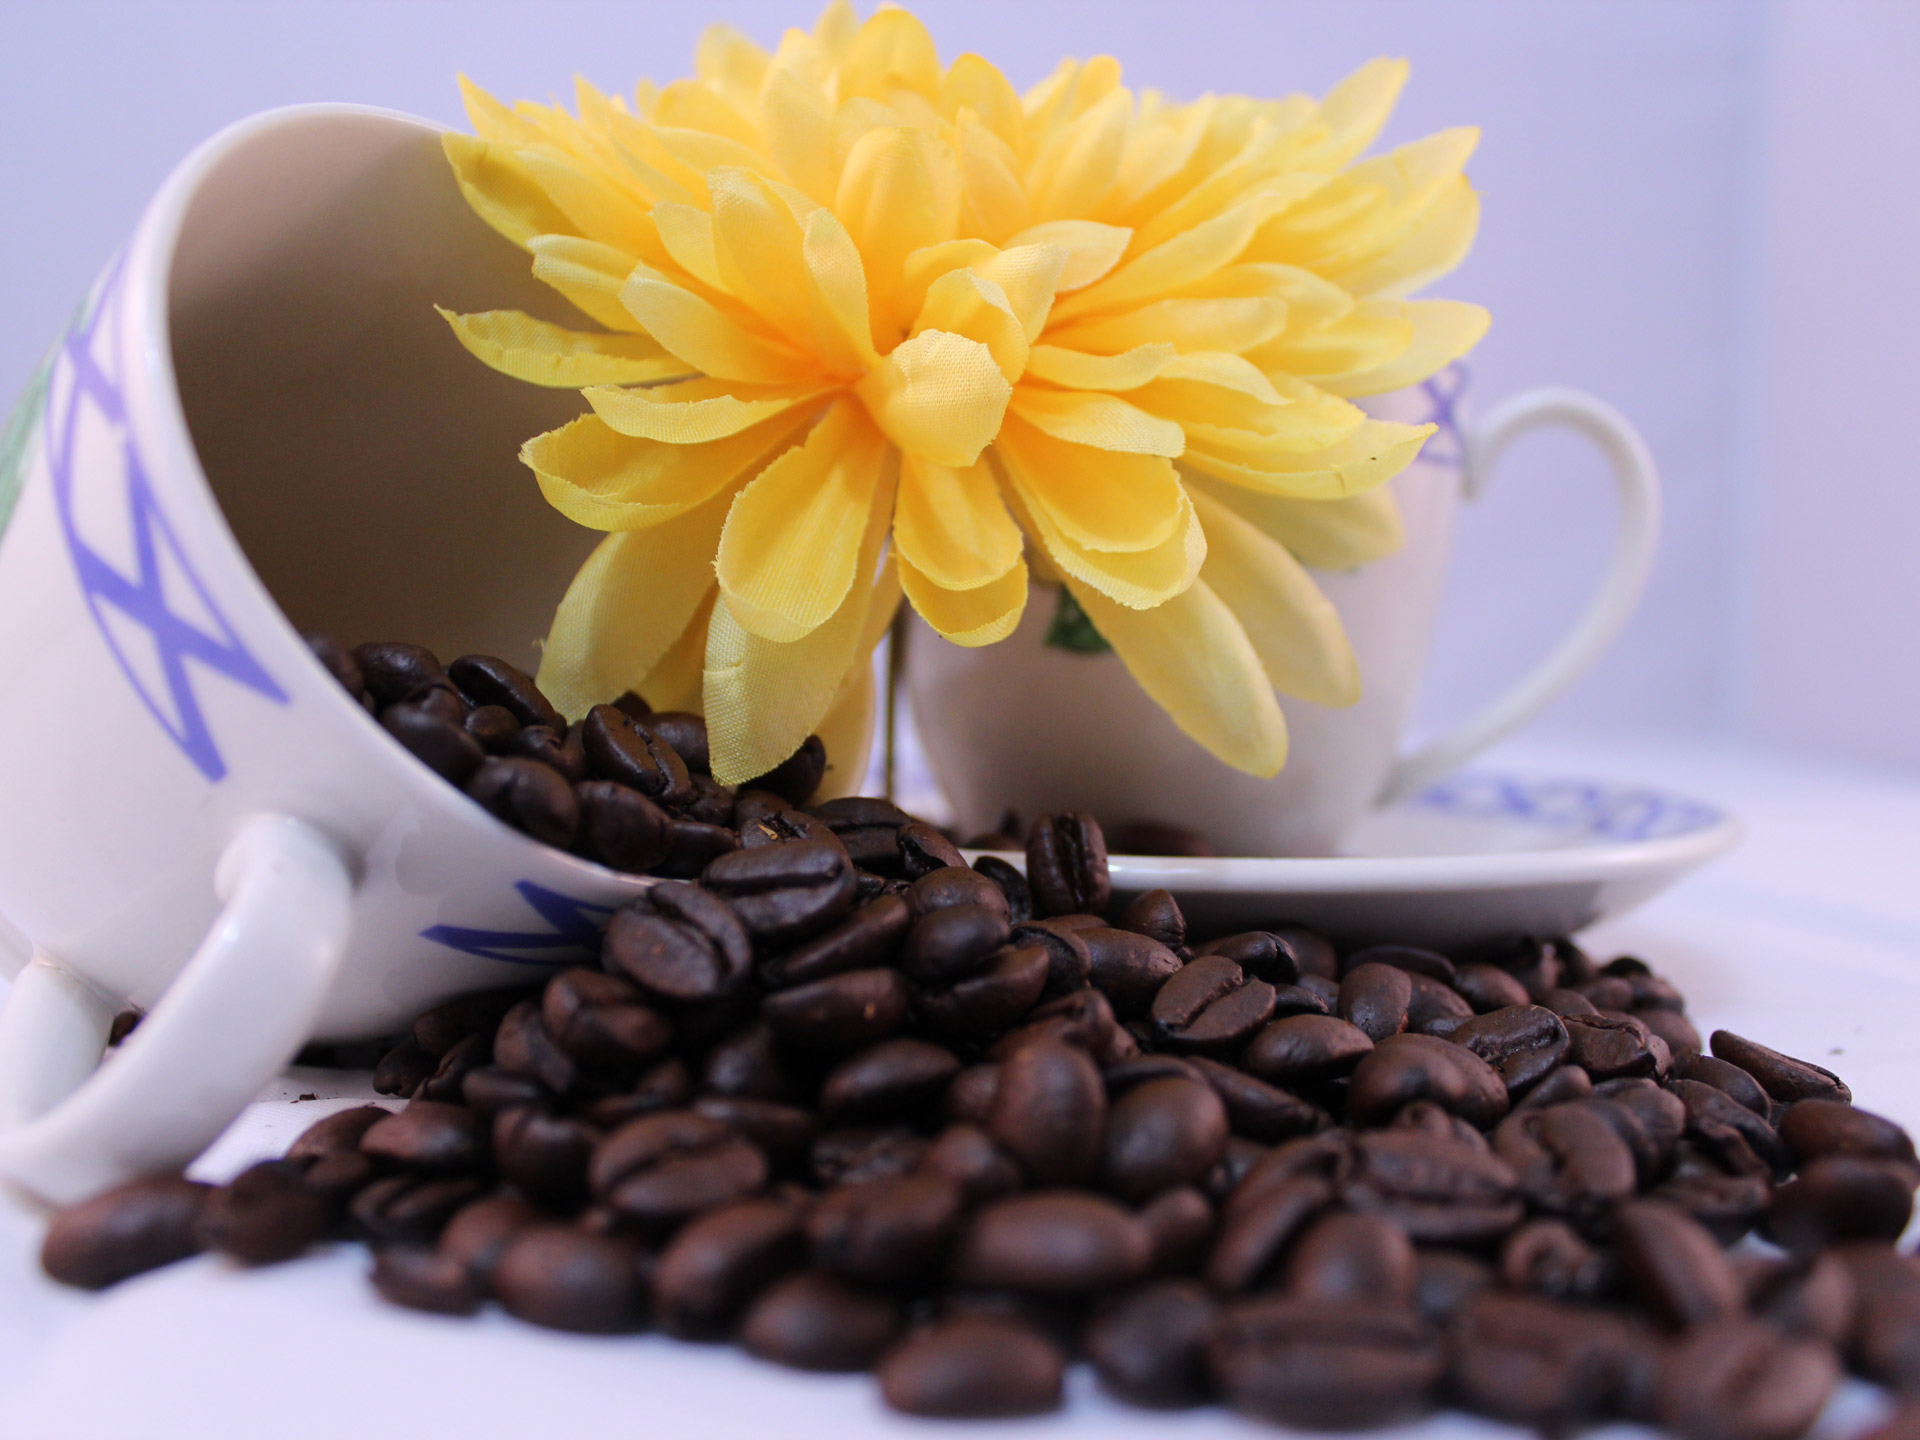 A set-up using teacups, coffee beans and a flower.